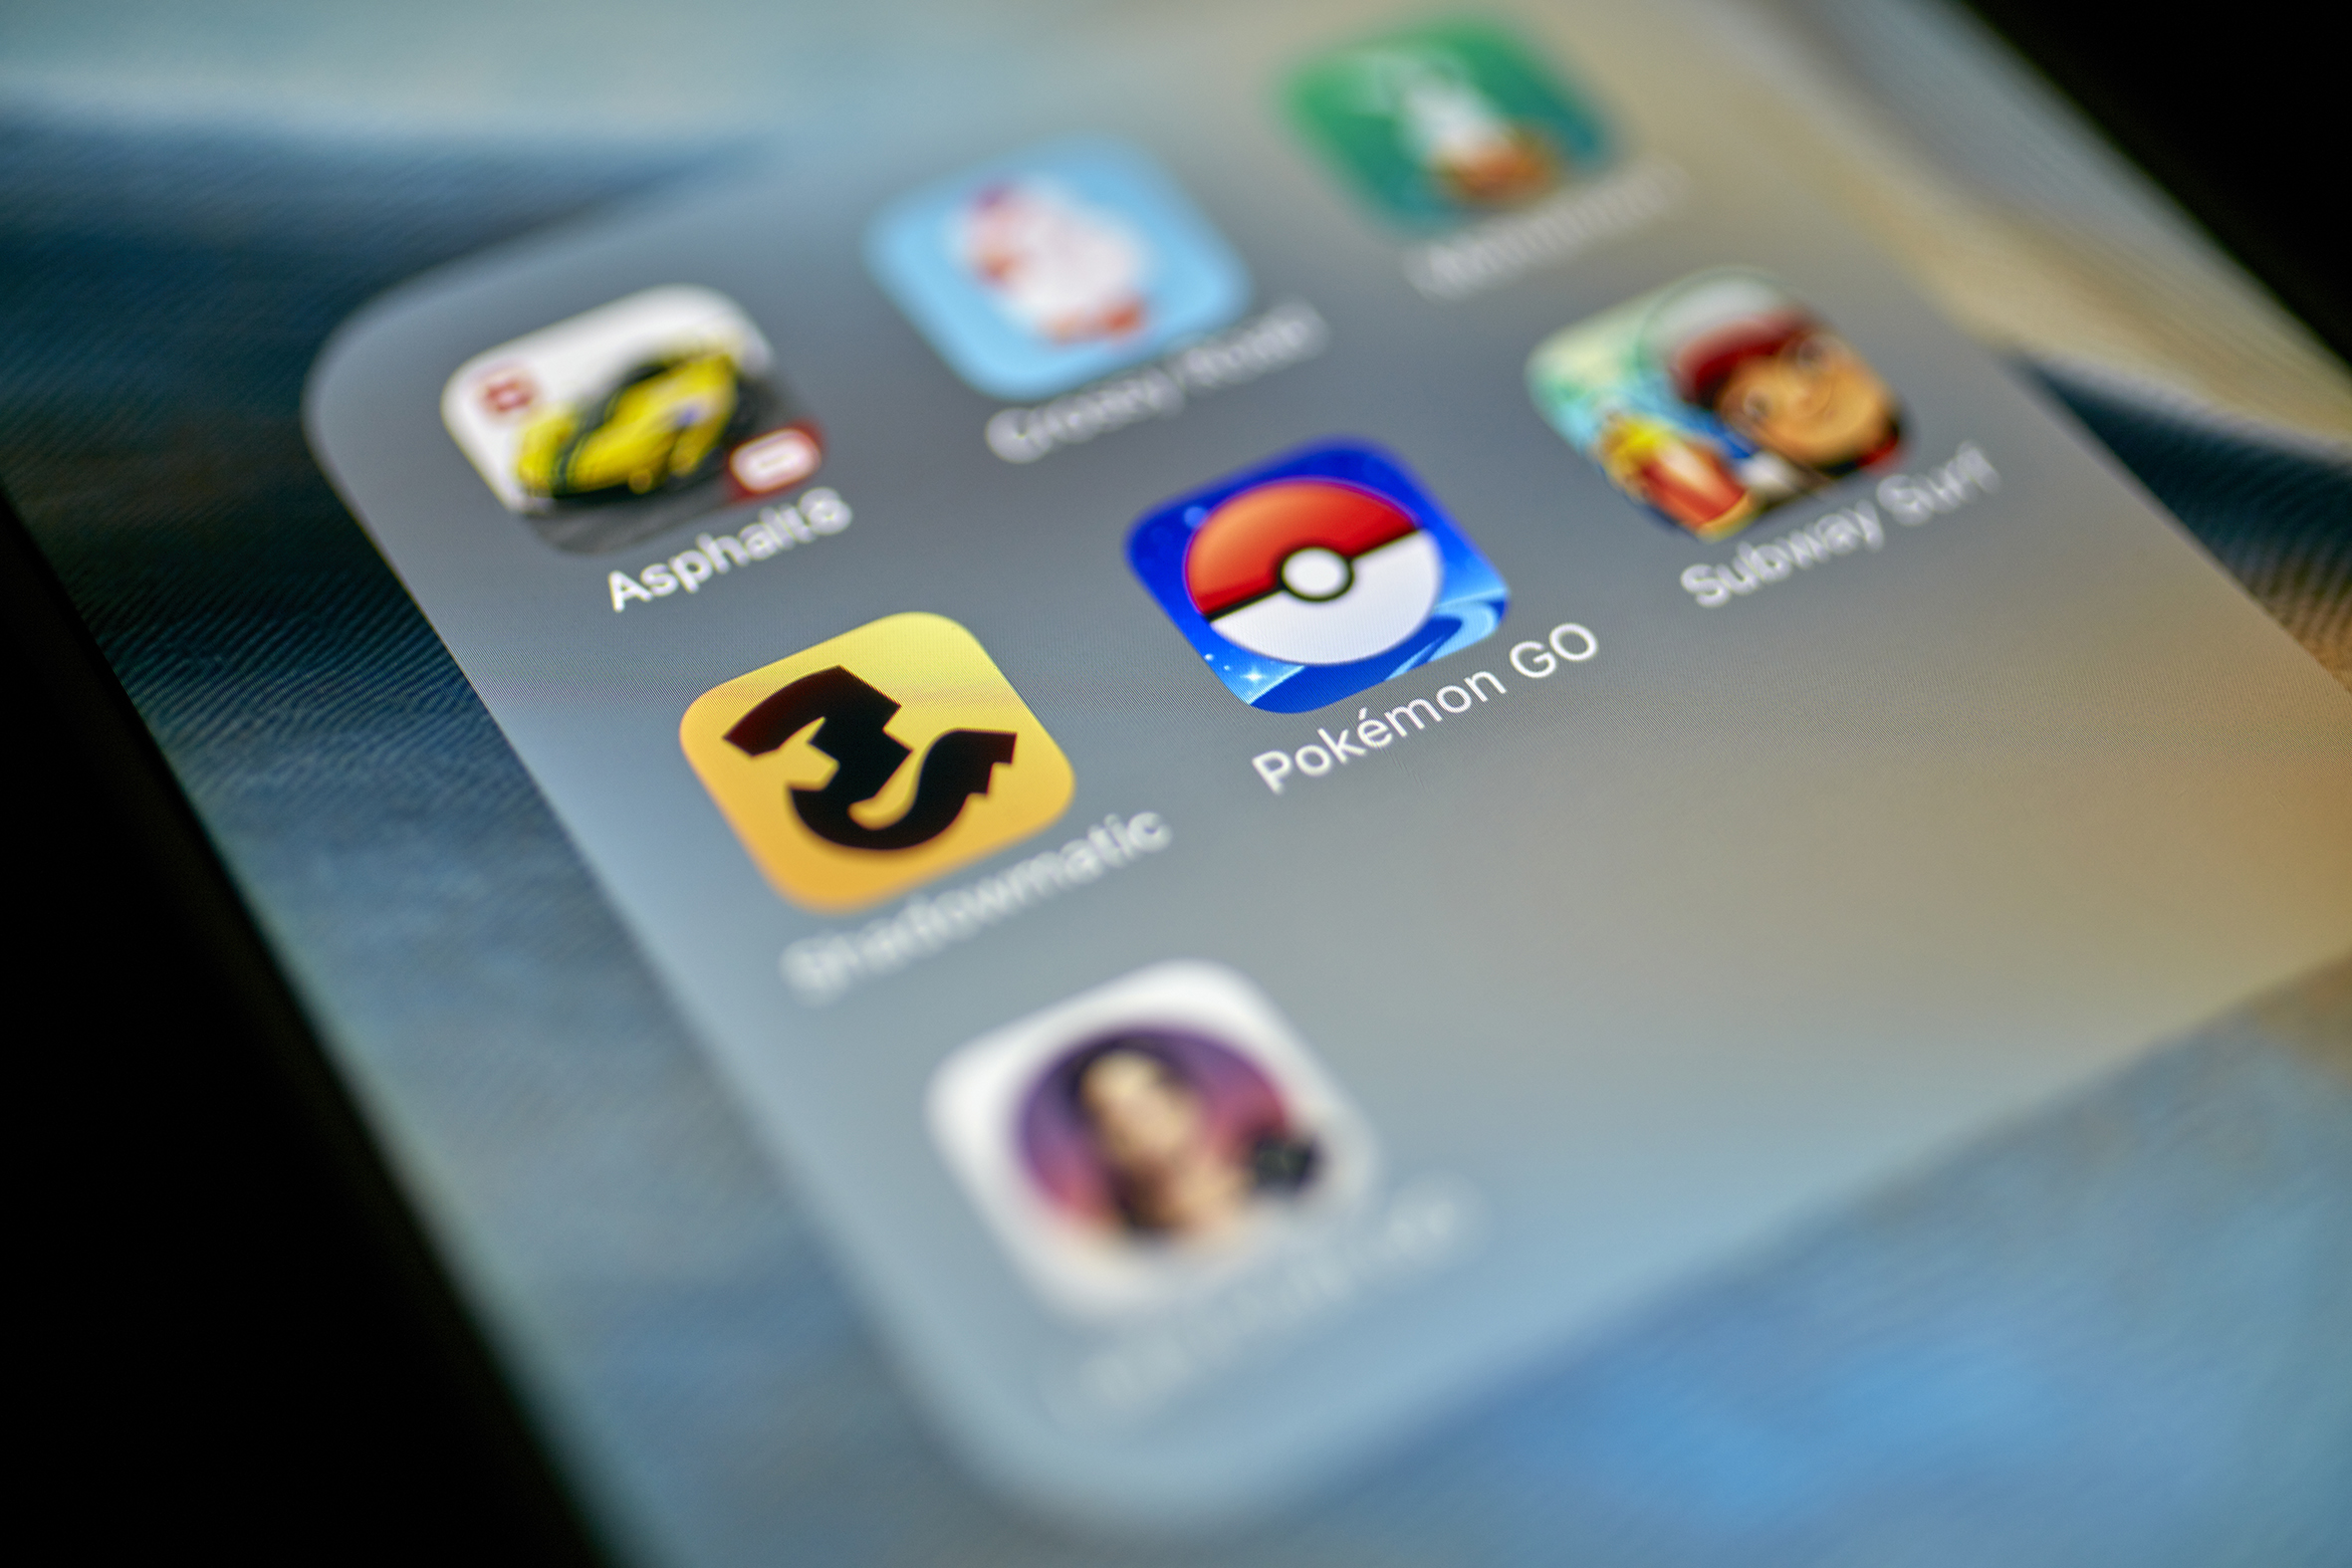 Istanbul, Turkey - July 14, 2016: Macro closeup image of Pokemon Go game app icon among other game icons on an iPhone.